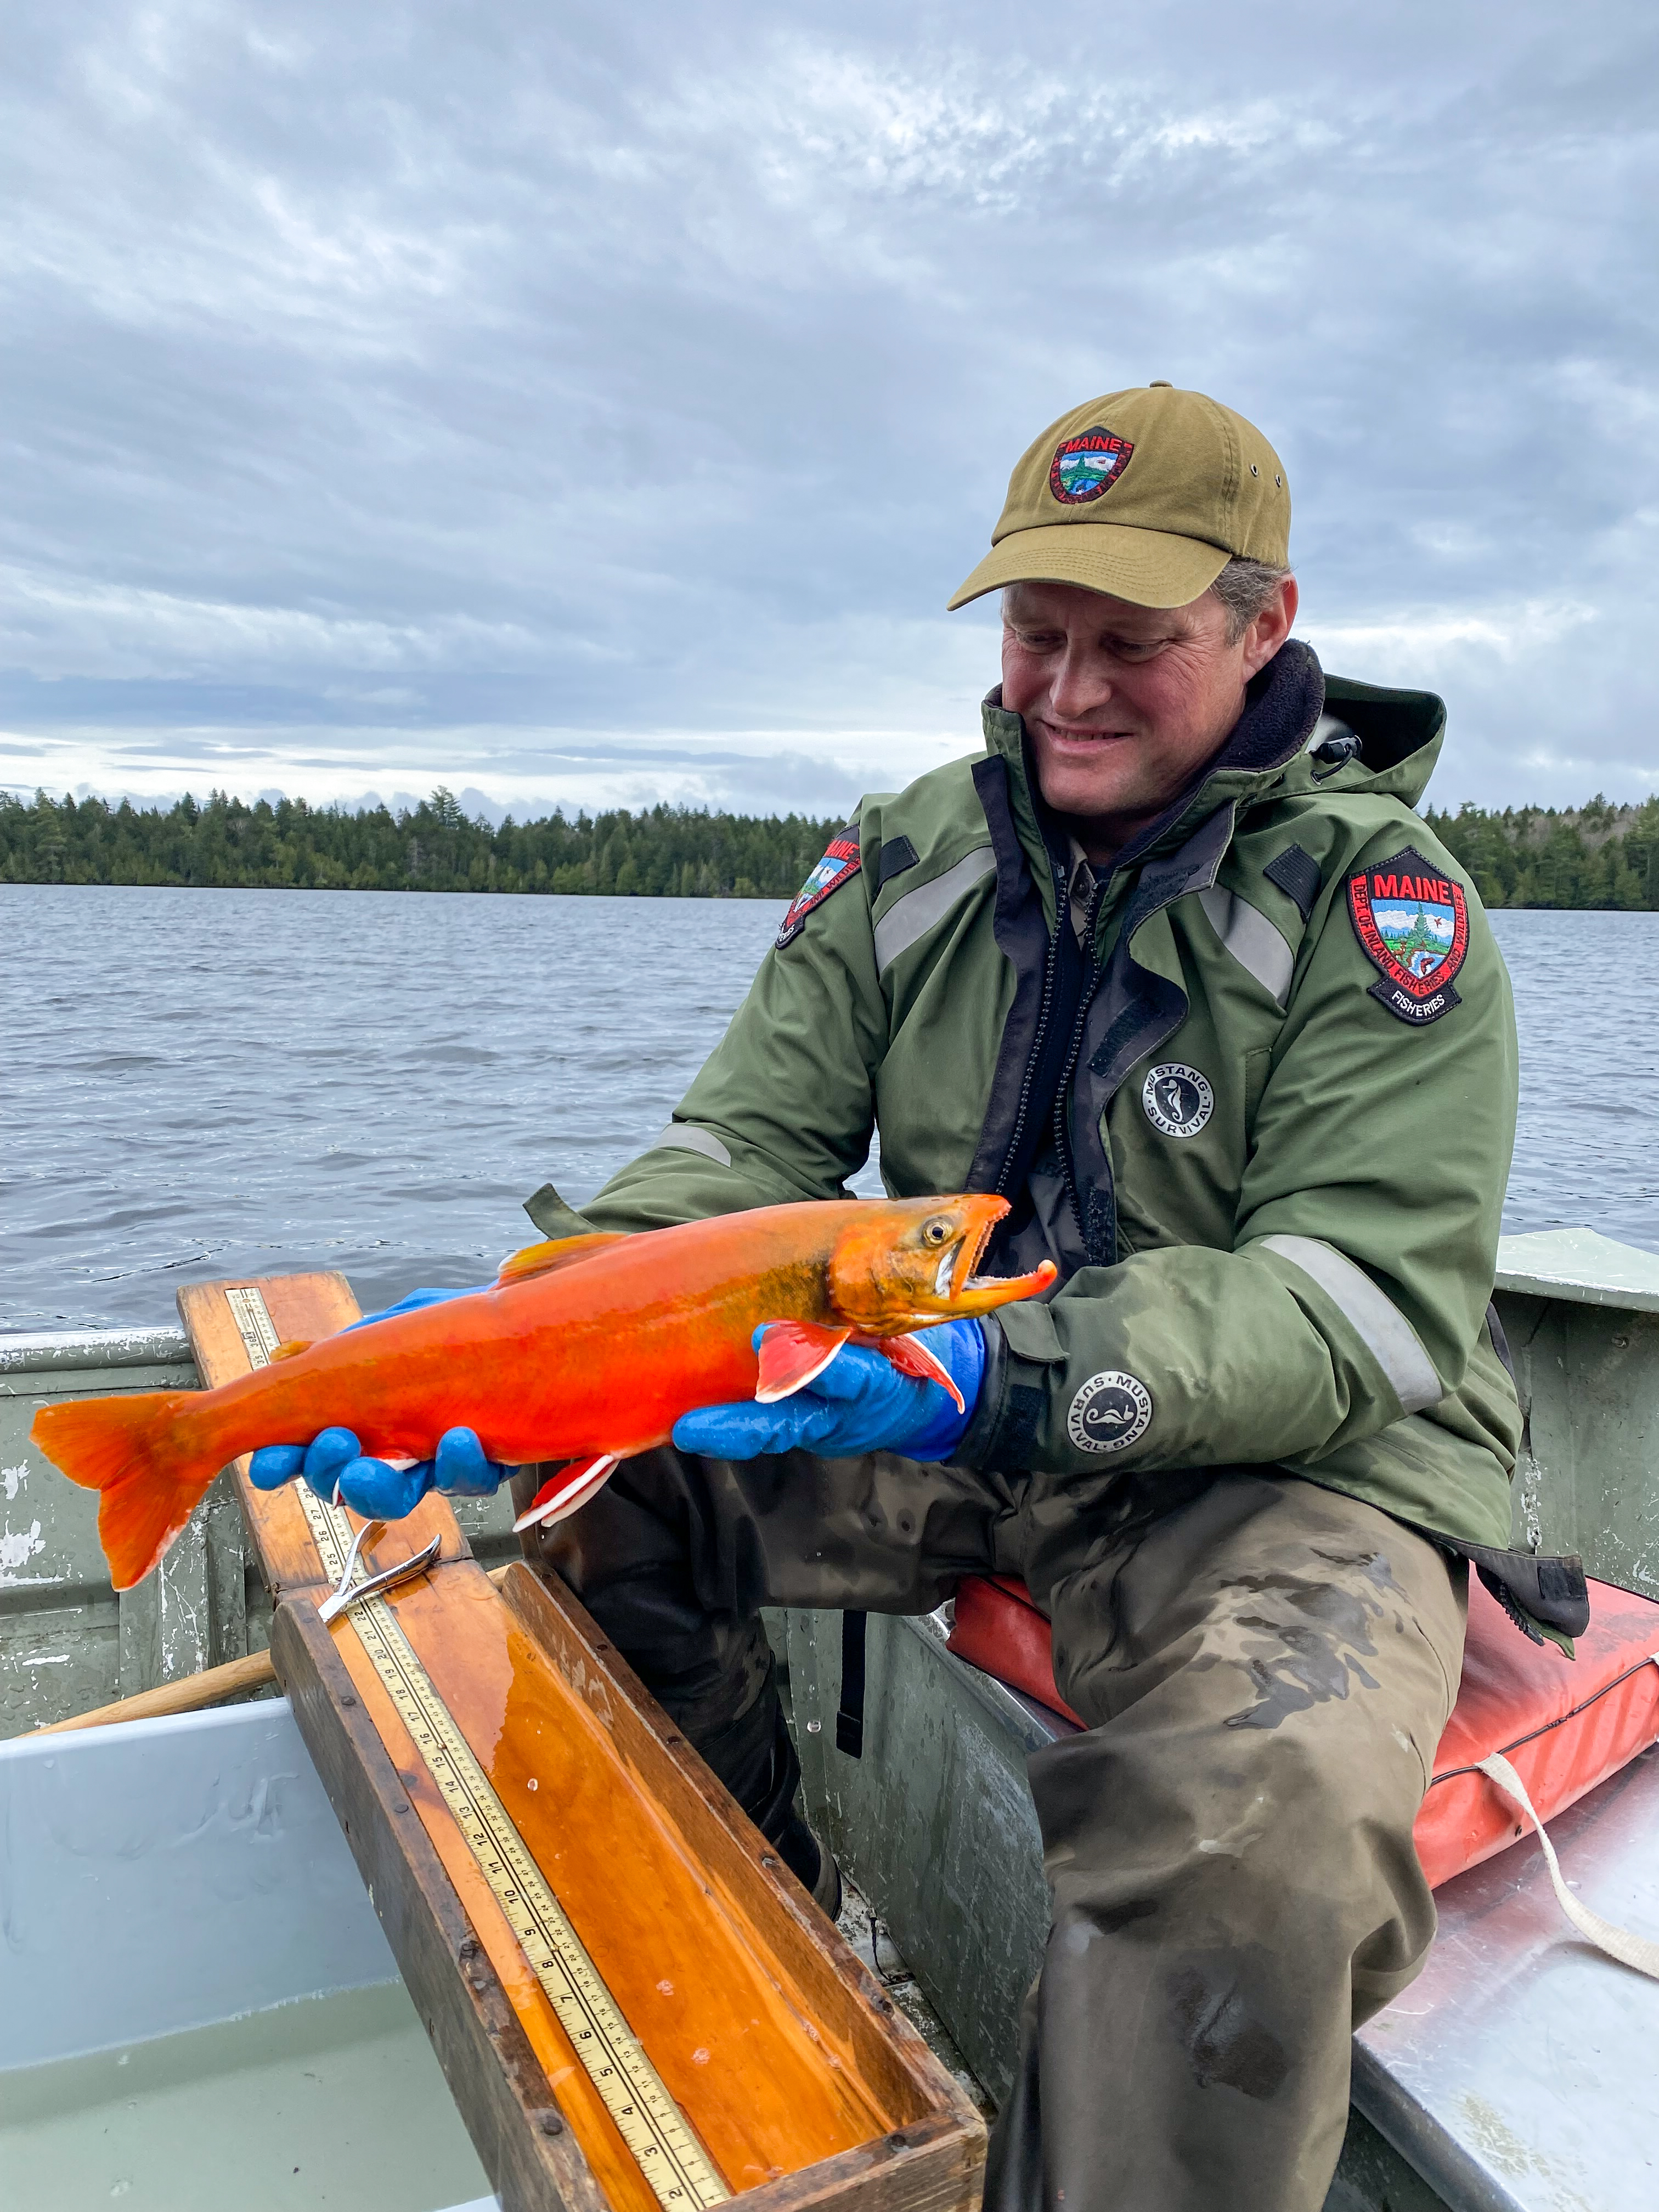 A Maine Department of Inland Fisheries and Wildlife biologists holds up a vibrant orange fish called an arctic charr.